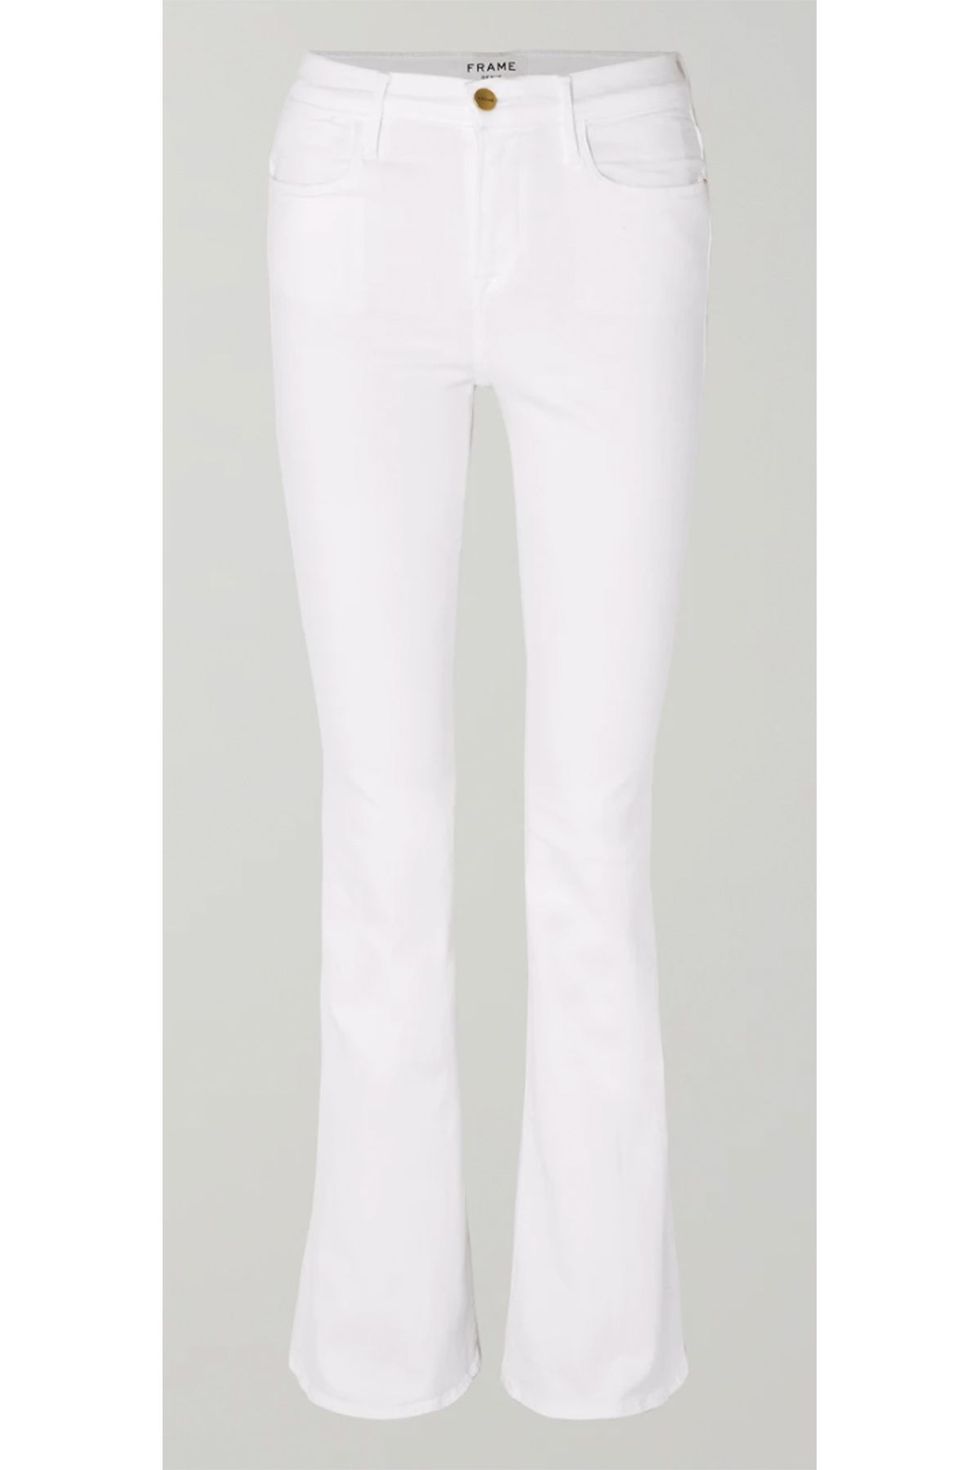 20 Best White Jeans to Wear Spring 2024 - Stylish White Denim for